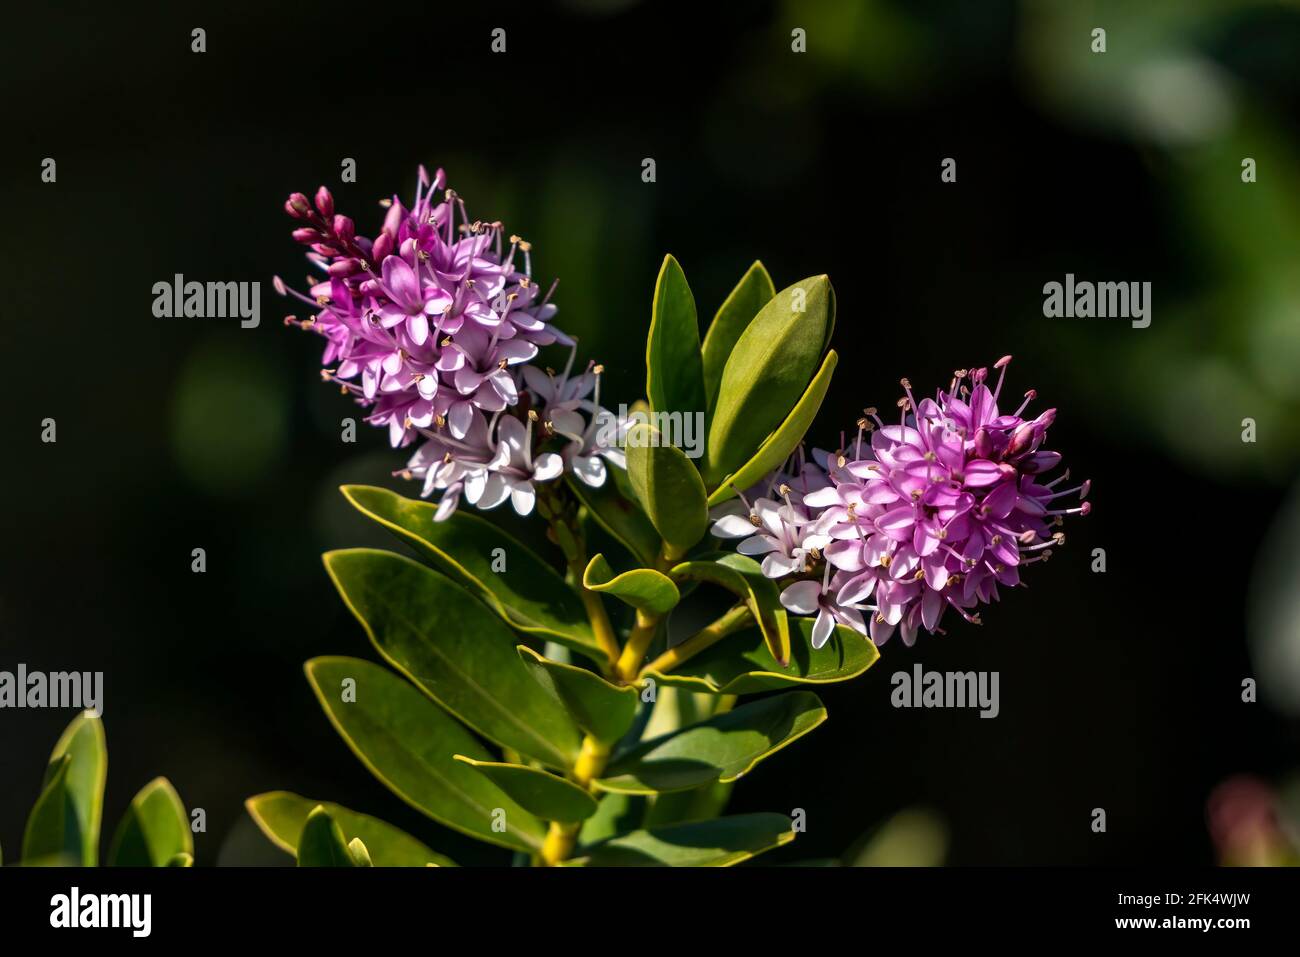 Hebe 'Hanne' a pink purple herbaceous perennial summer and autumn flower shrub plant, stock photo image Stock Photo